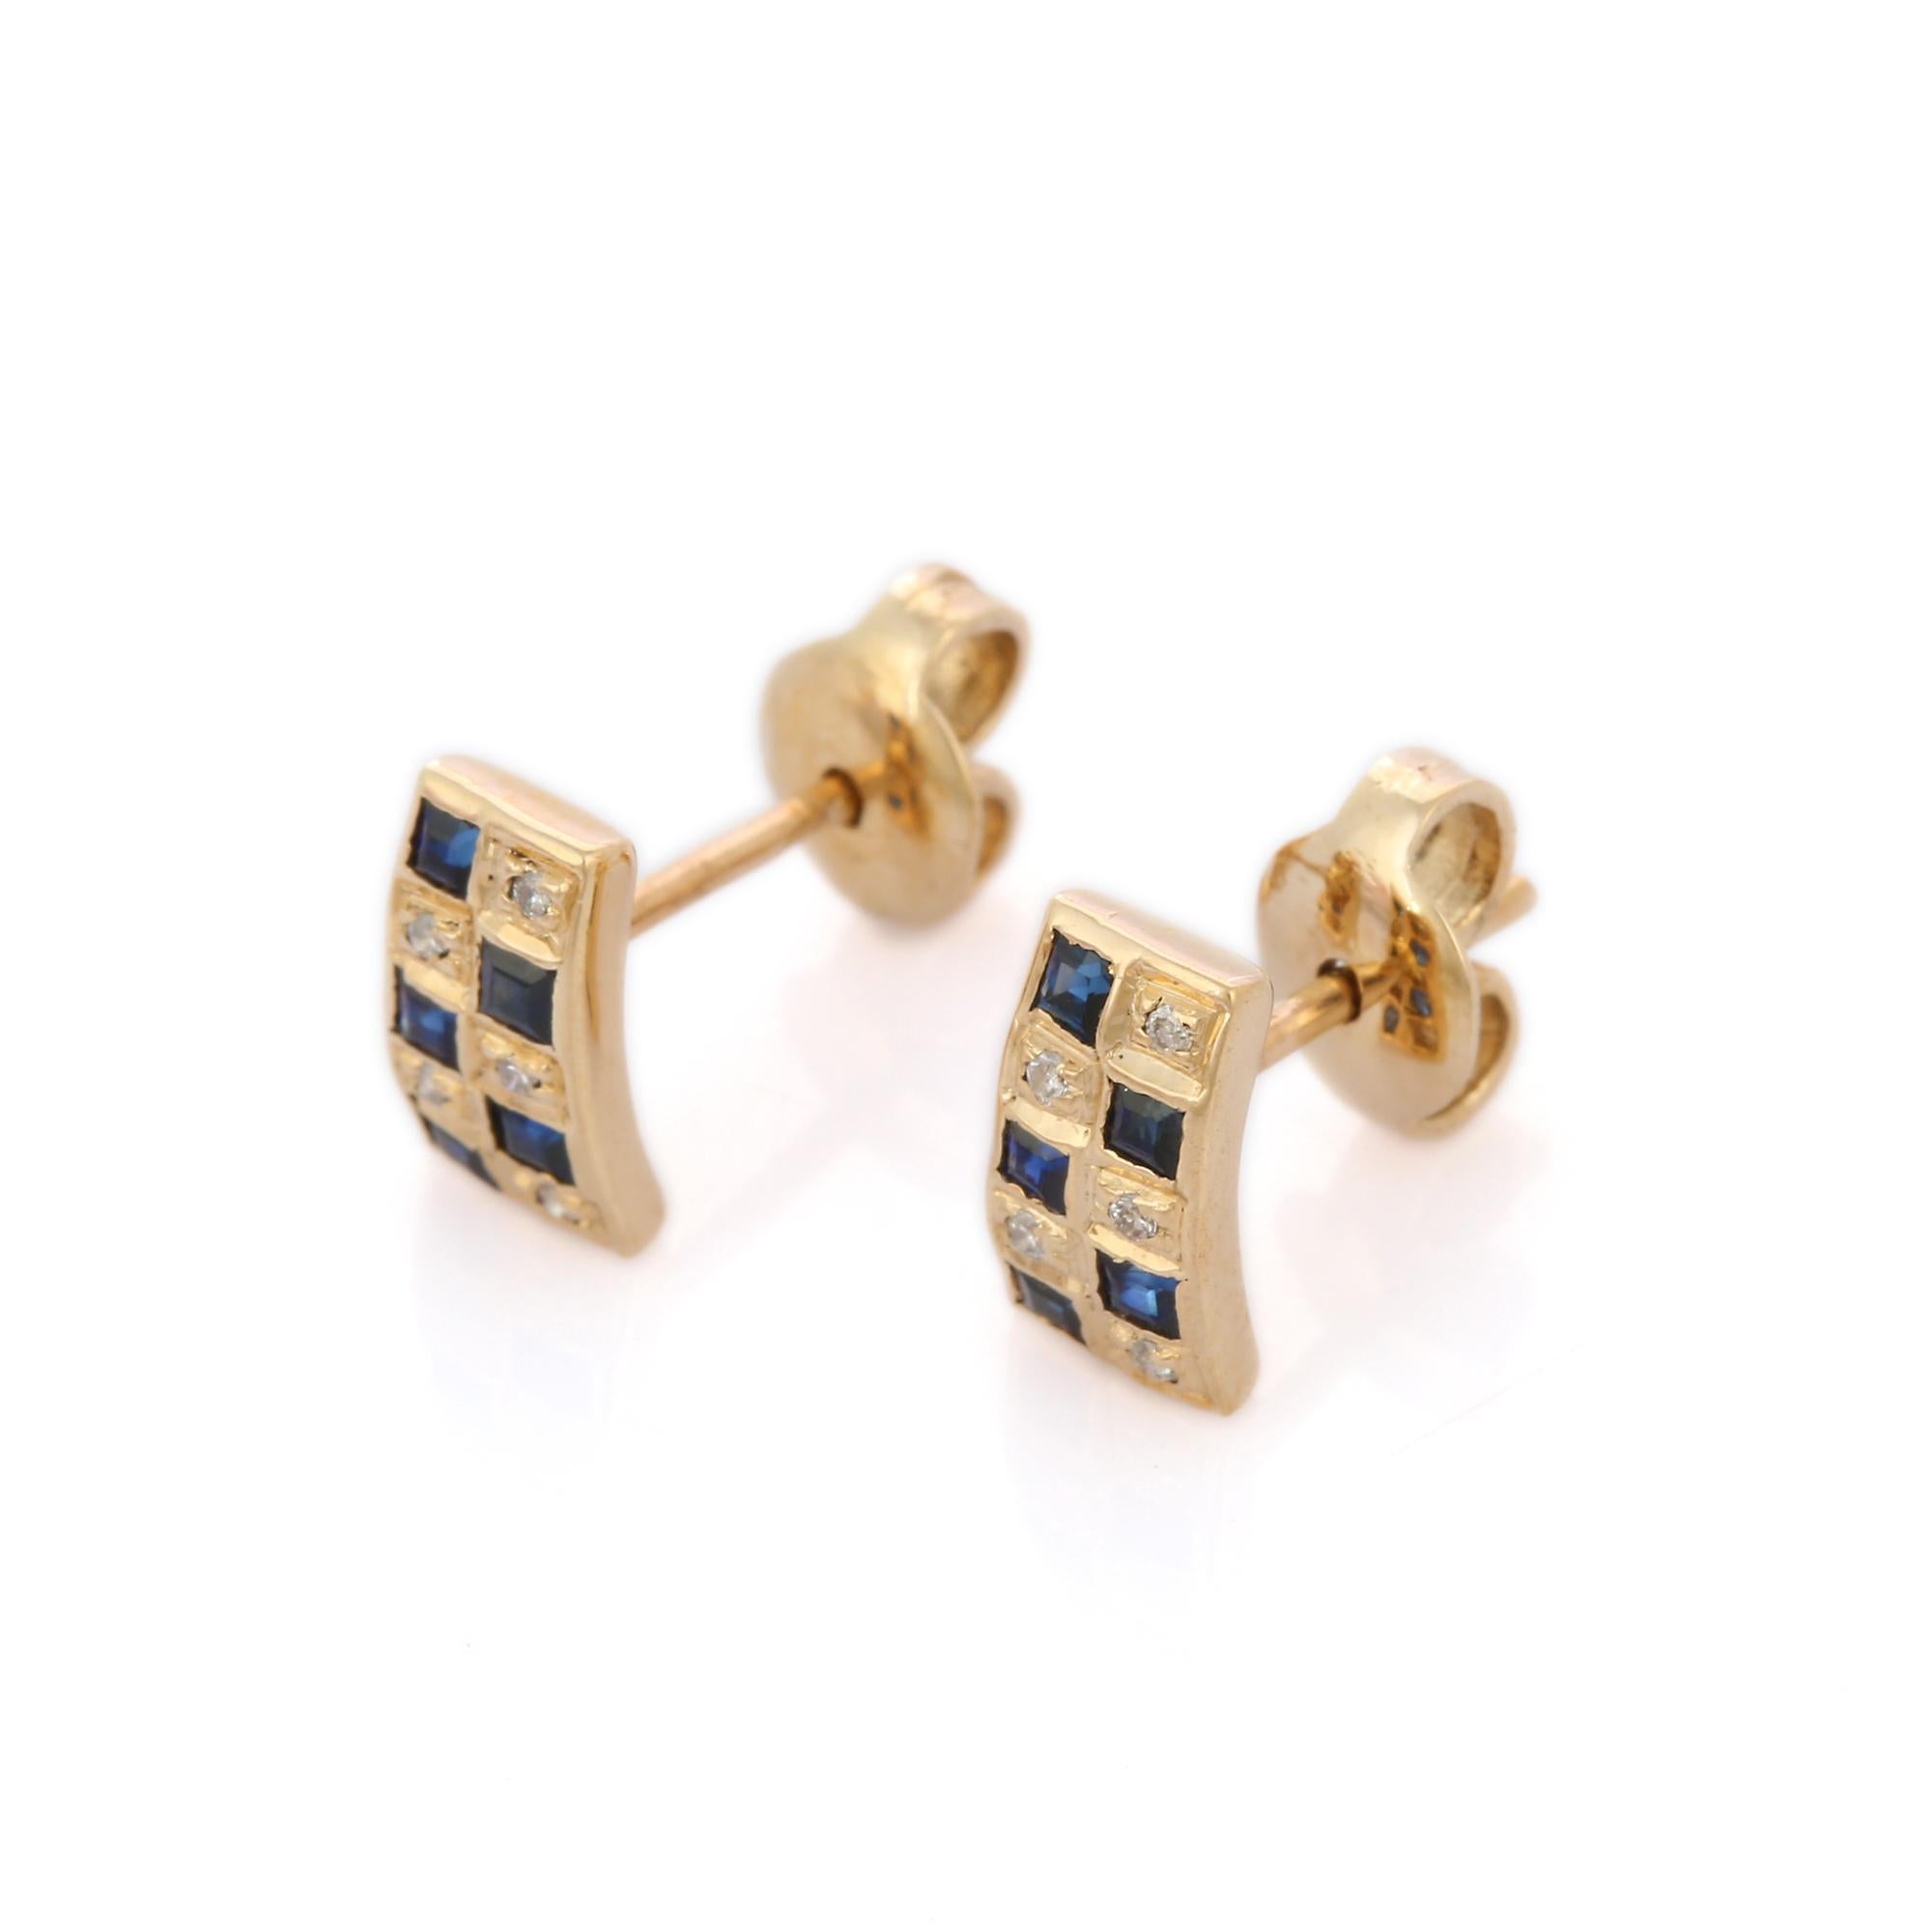 Studs create a subtle beauty while showcasing the colors of the natural precious gemstones and illuminating diamonds making a statement.

Square cut blue sapphire studs in 14K gold. Embrace your look with these stunning pair of earrings suitable for